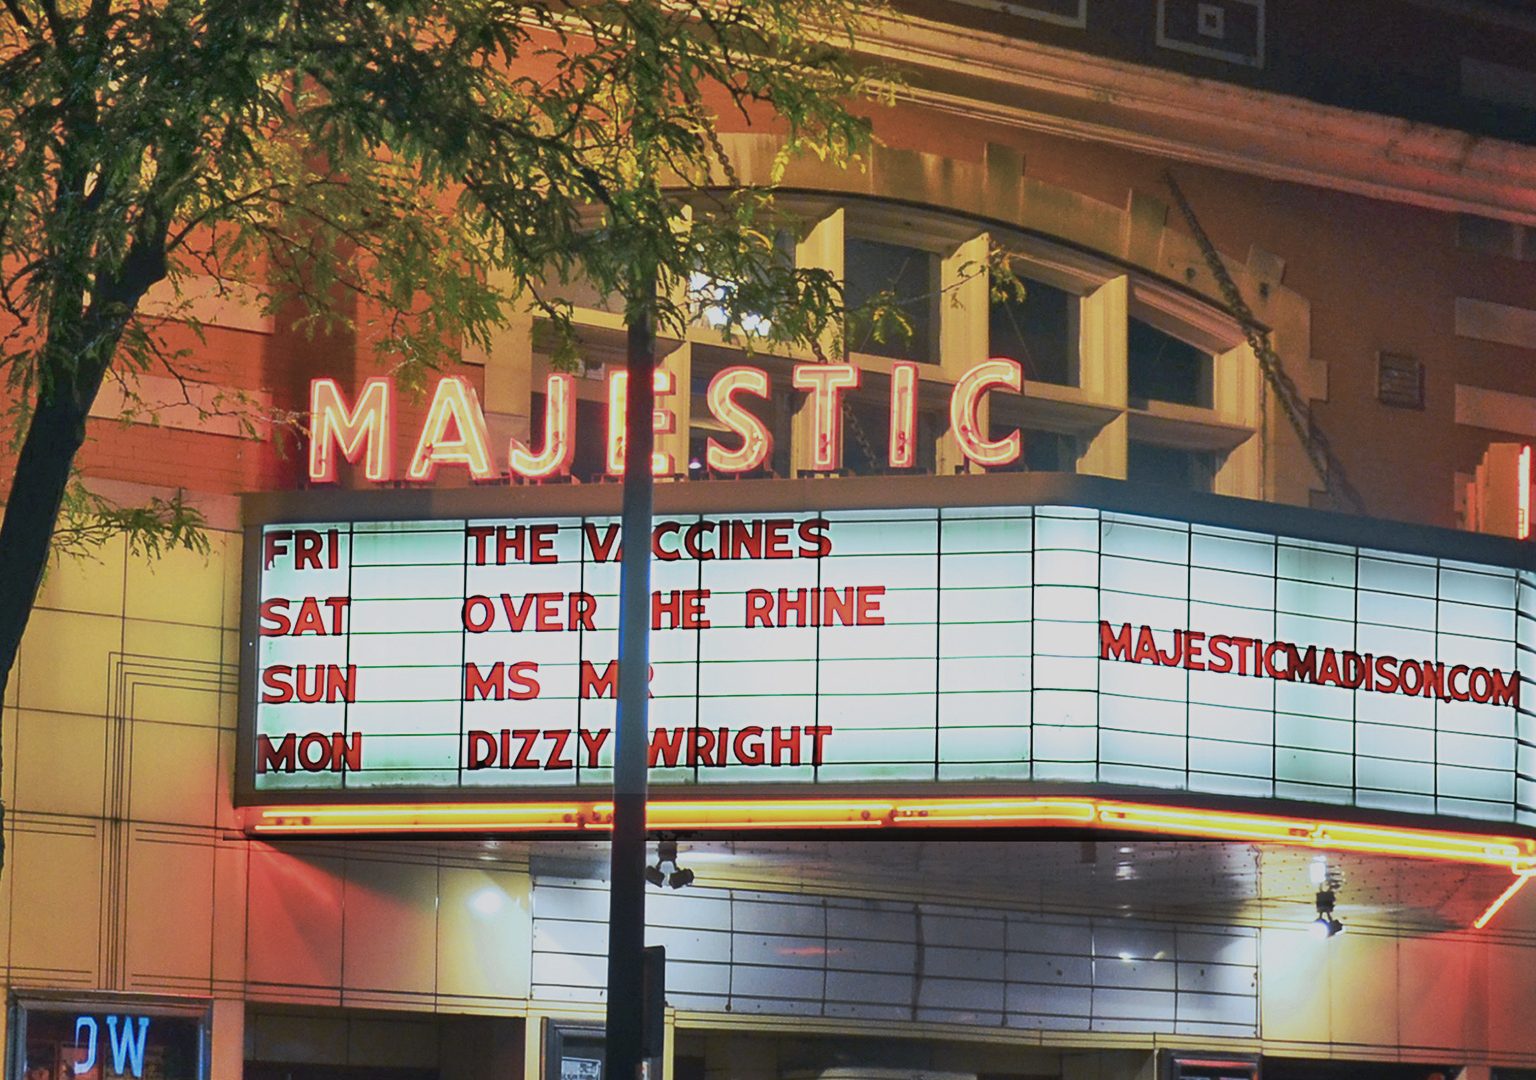 View of illuminated Majestic Theater marquee from across a street at night